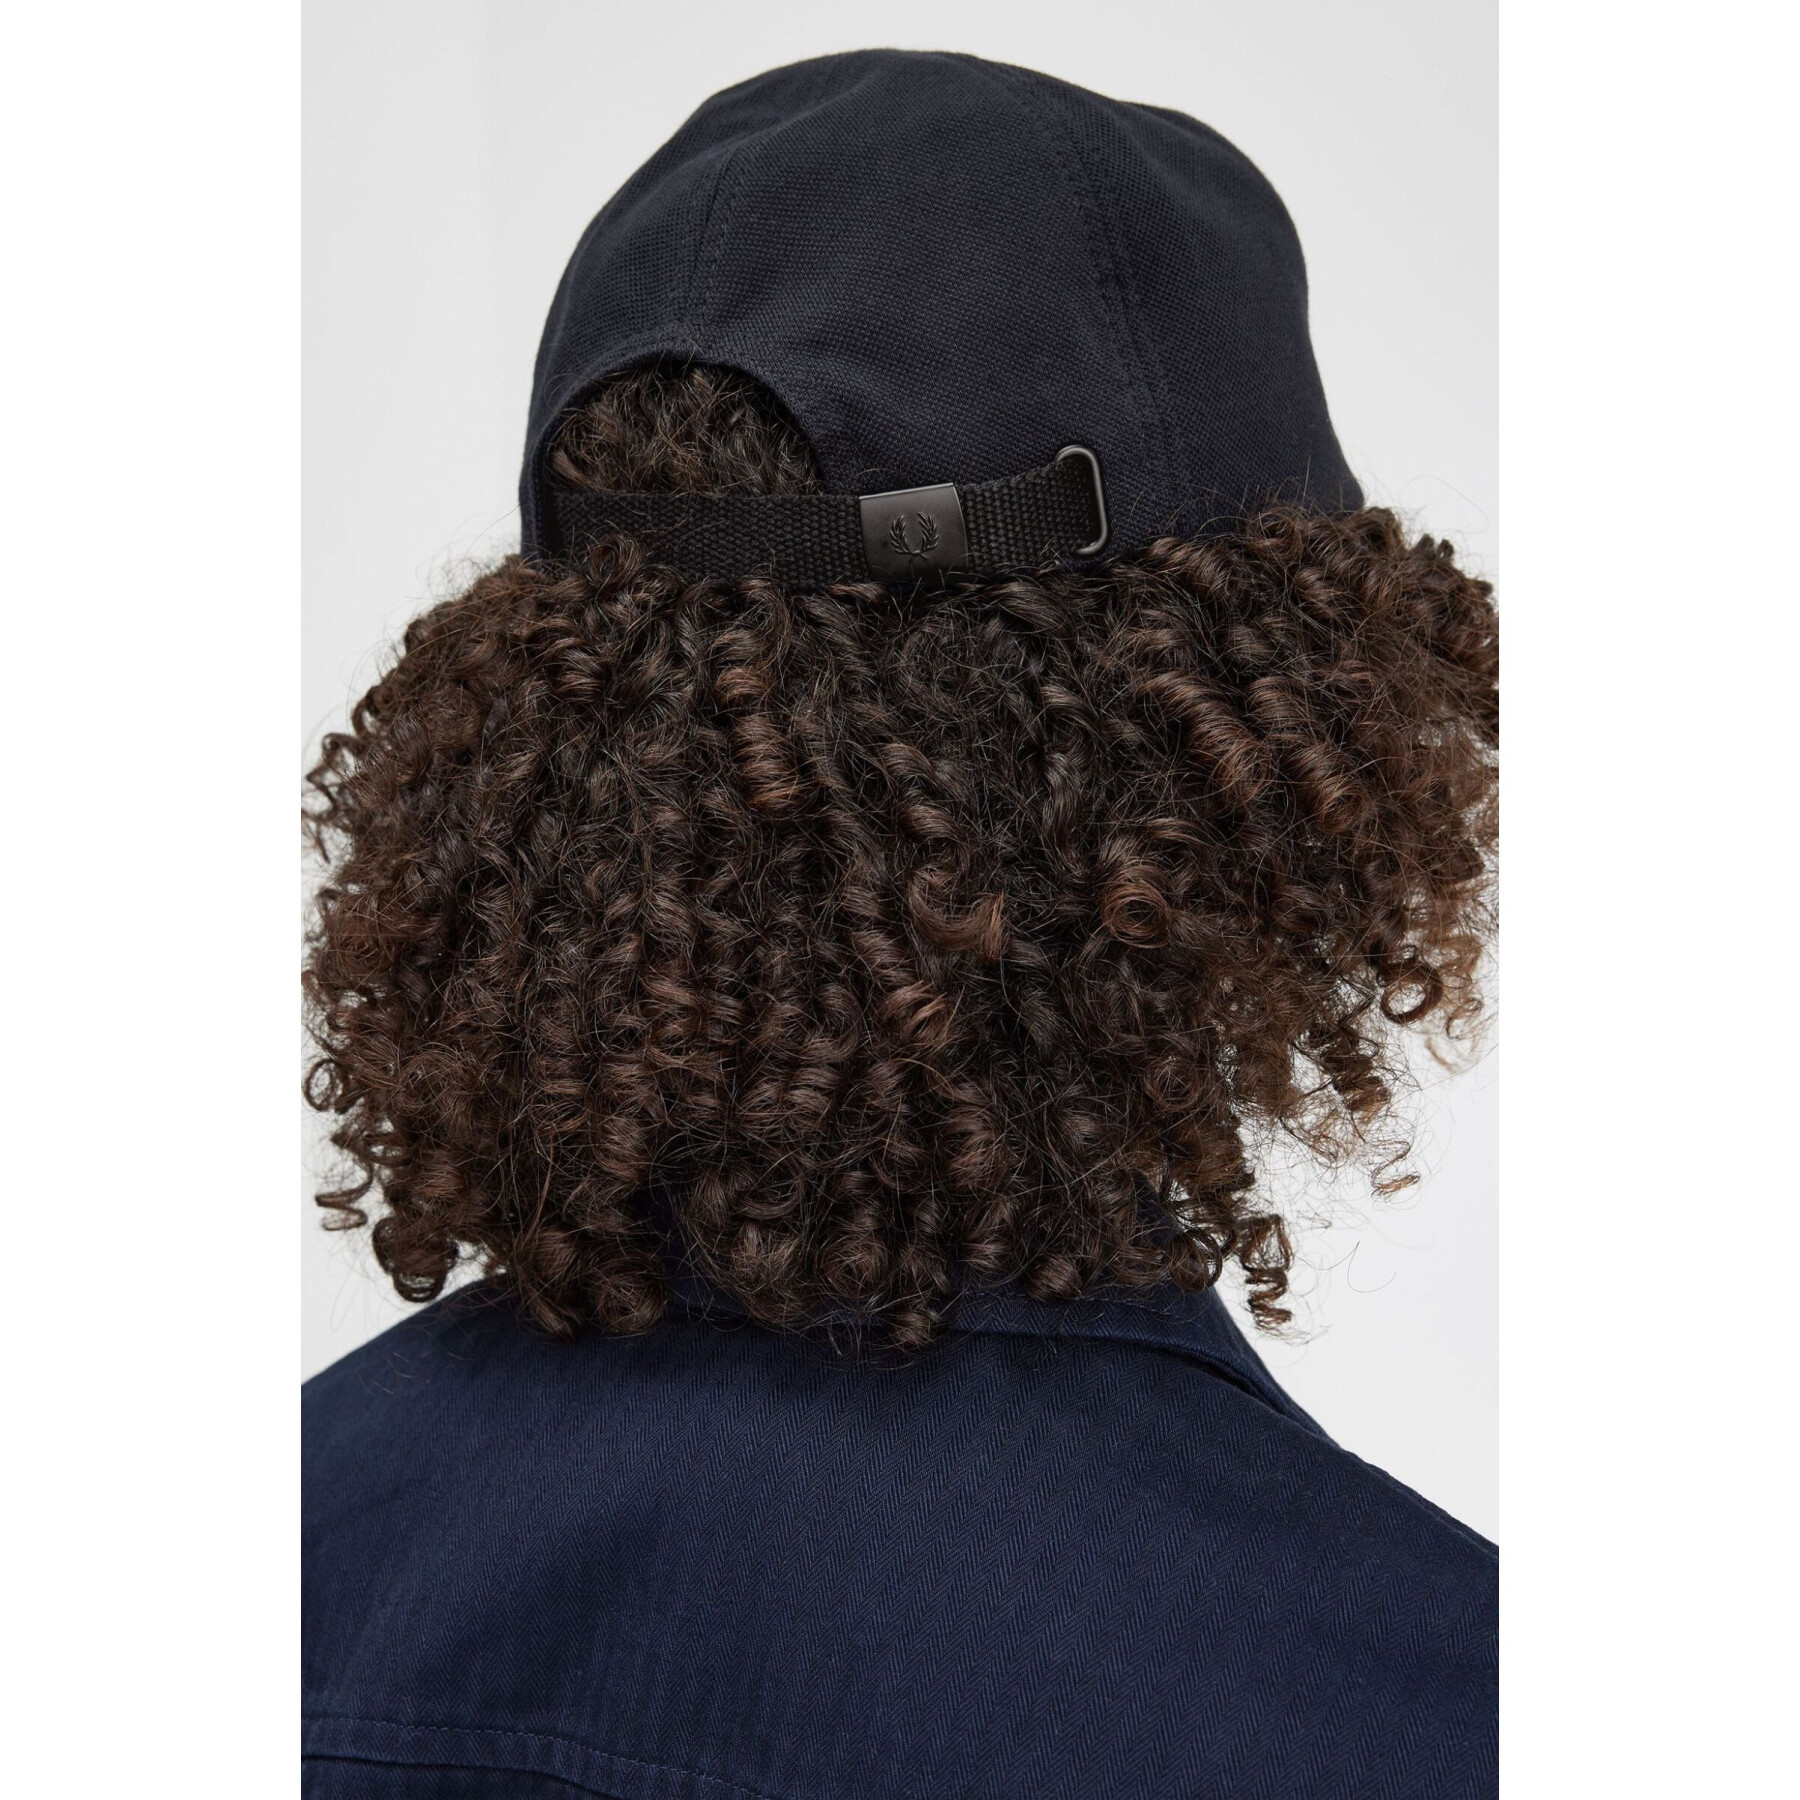 Baseball cap Fred Perry Pique Classic